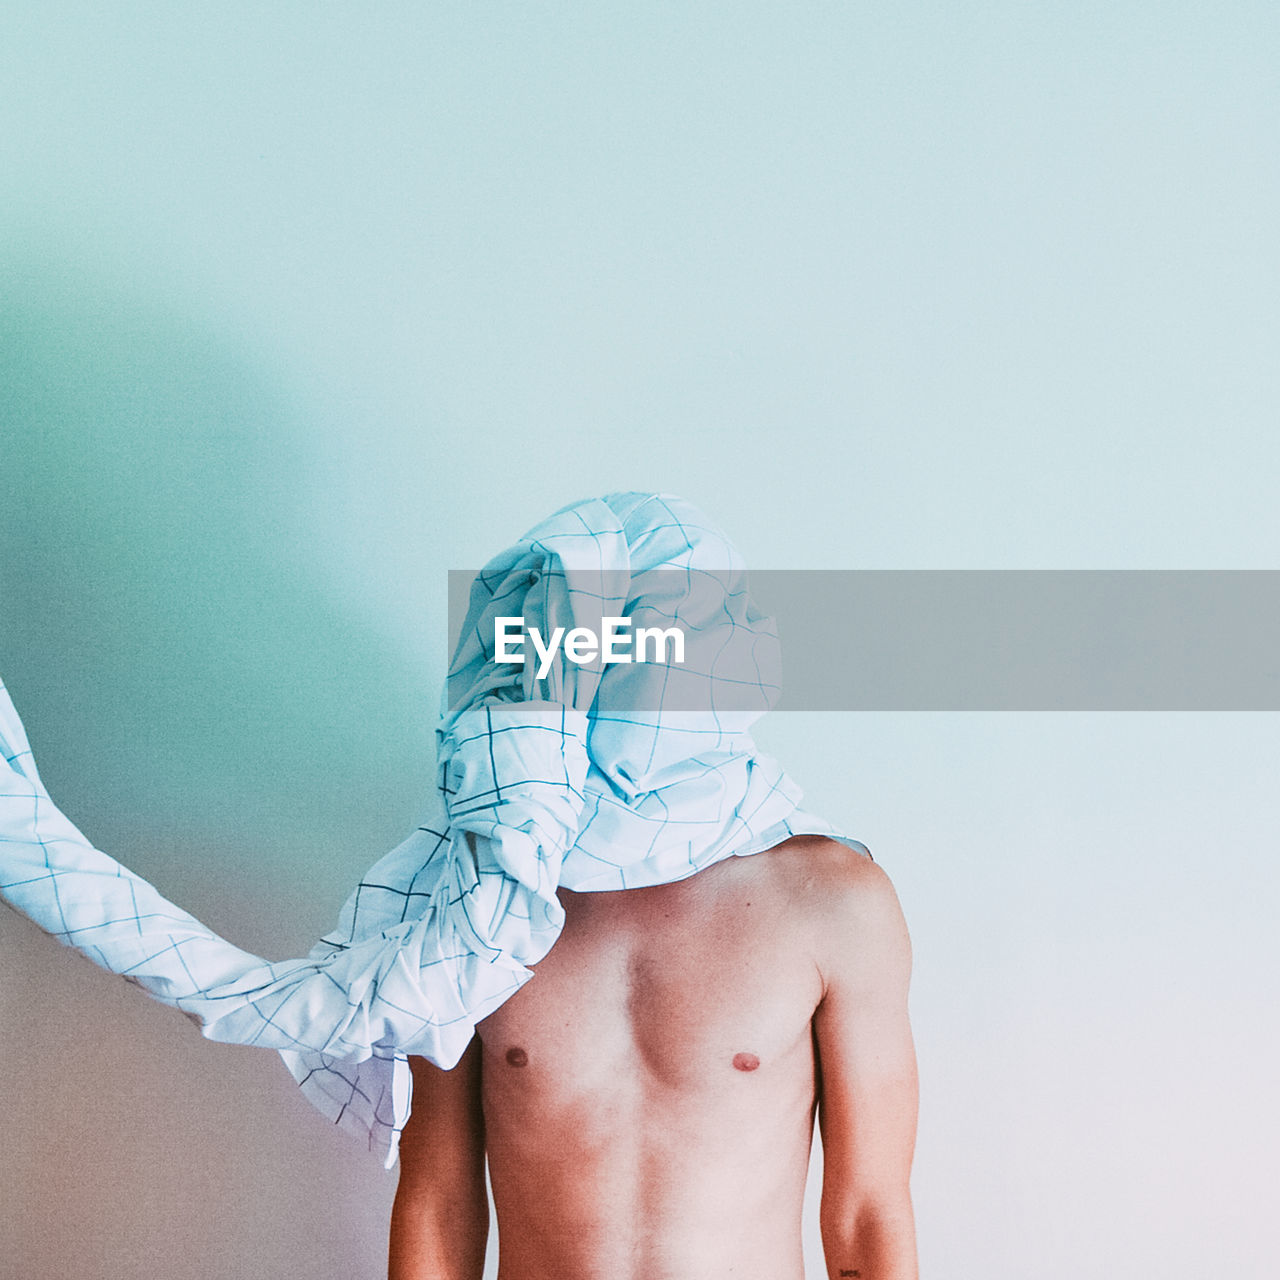 Shirtless man face covered with fabric against white wall